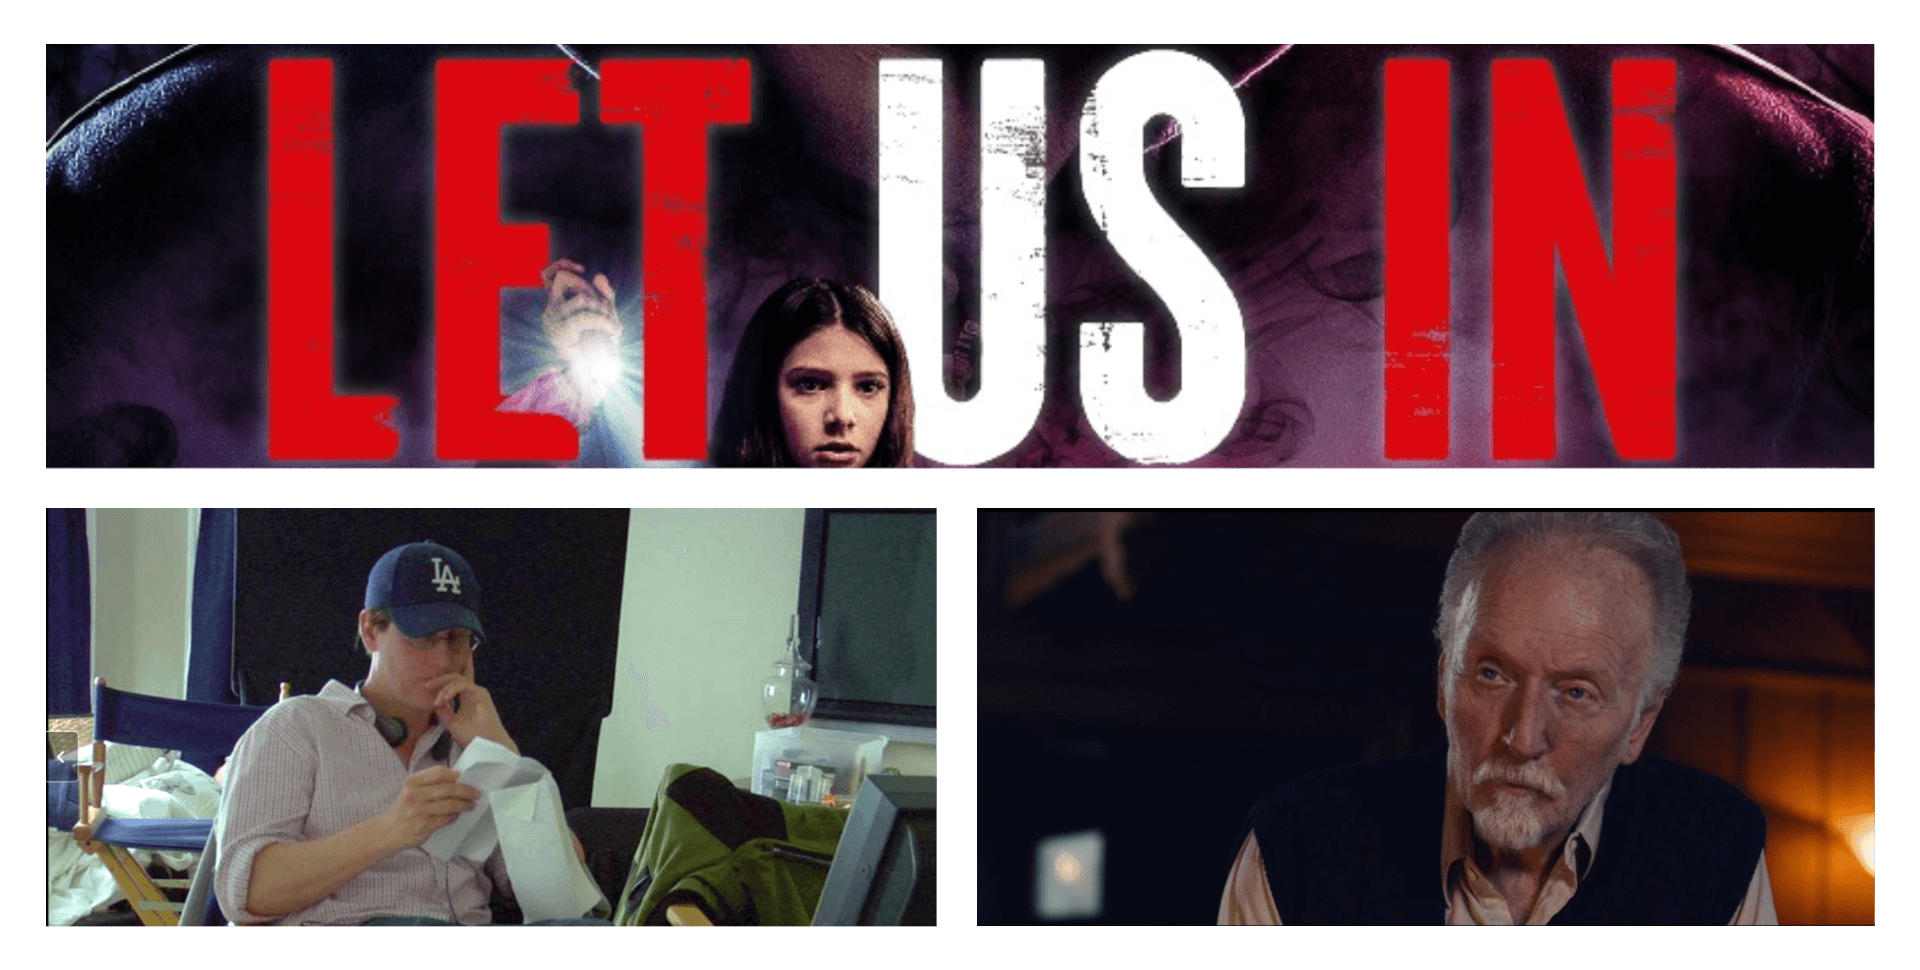 Interview with Director Craig Moss on "Let Us In"